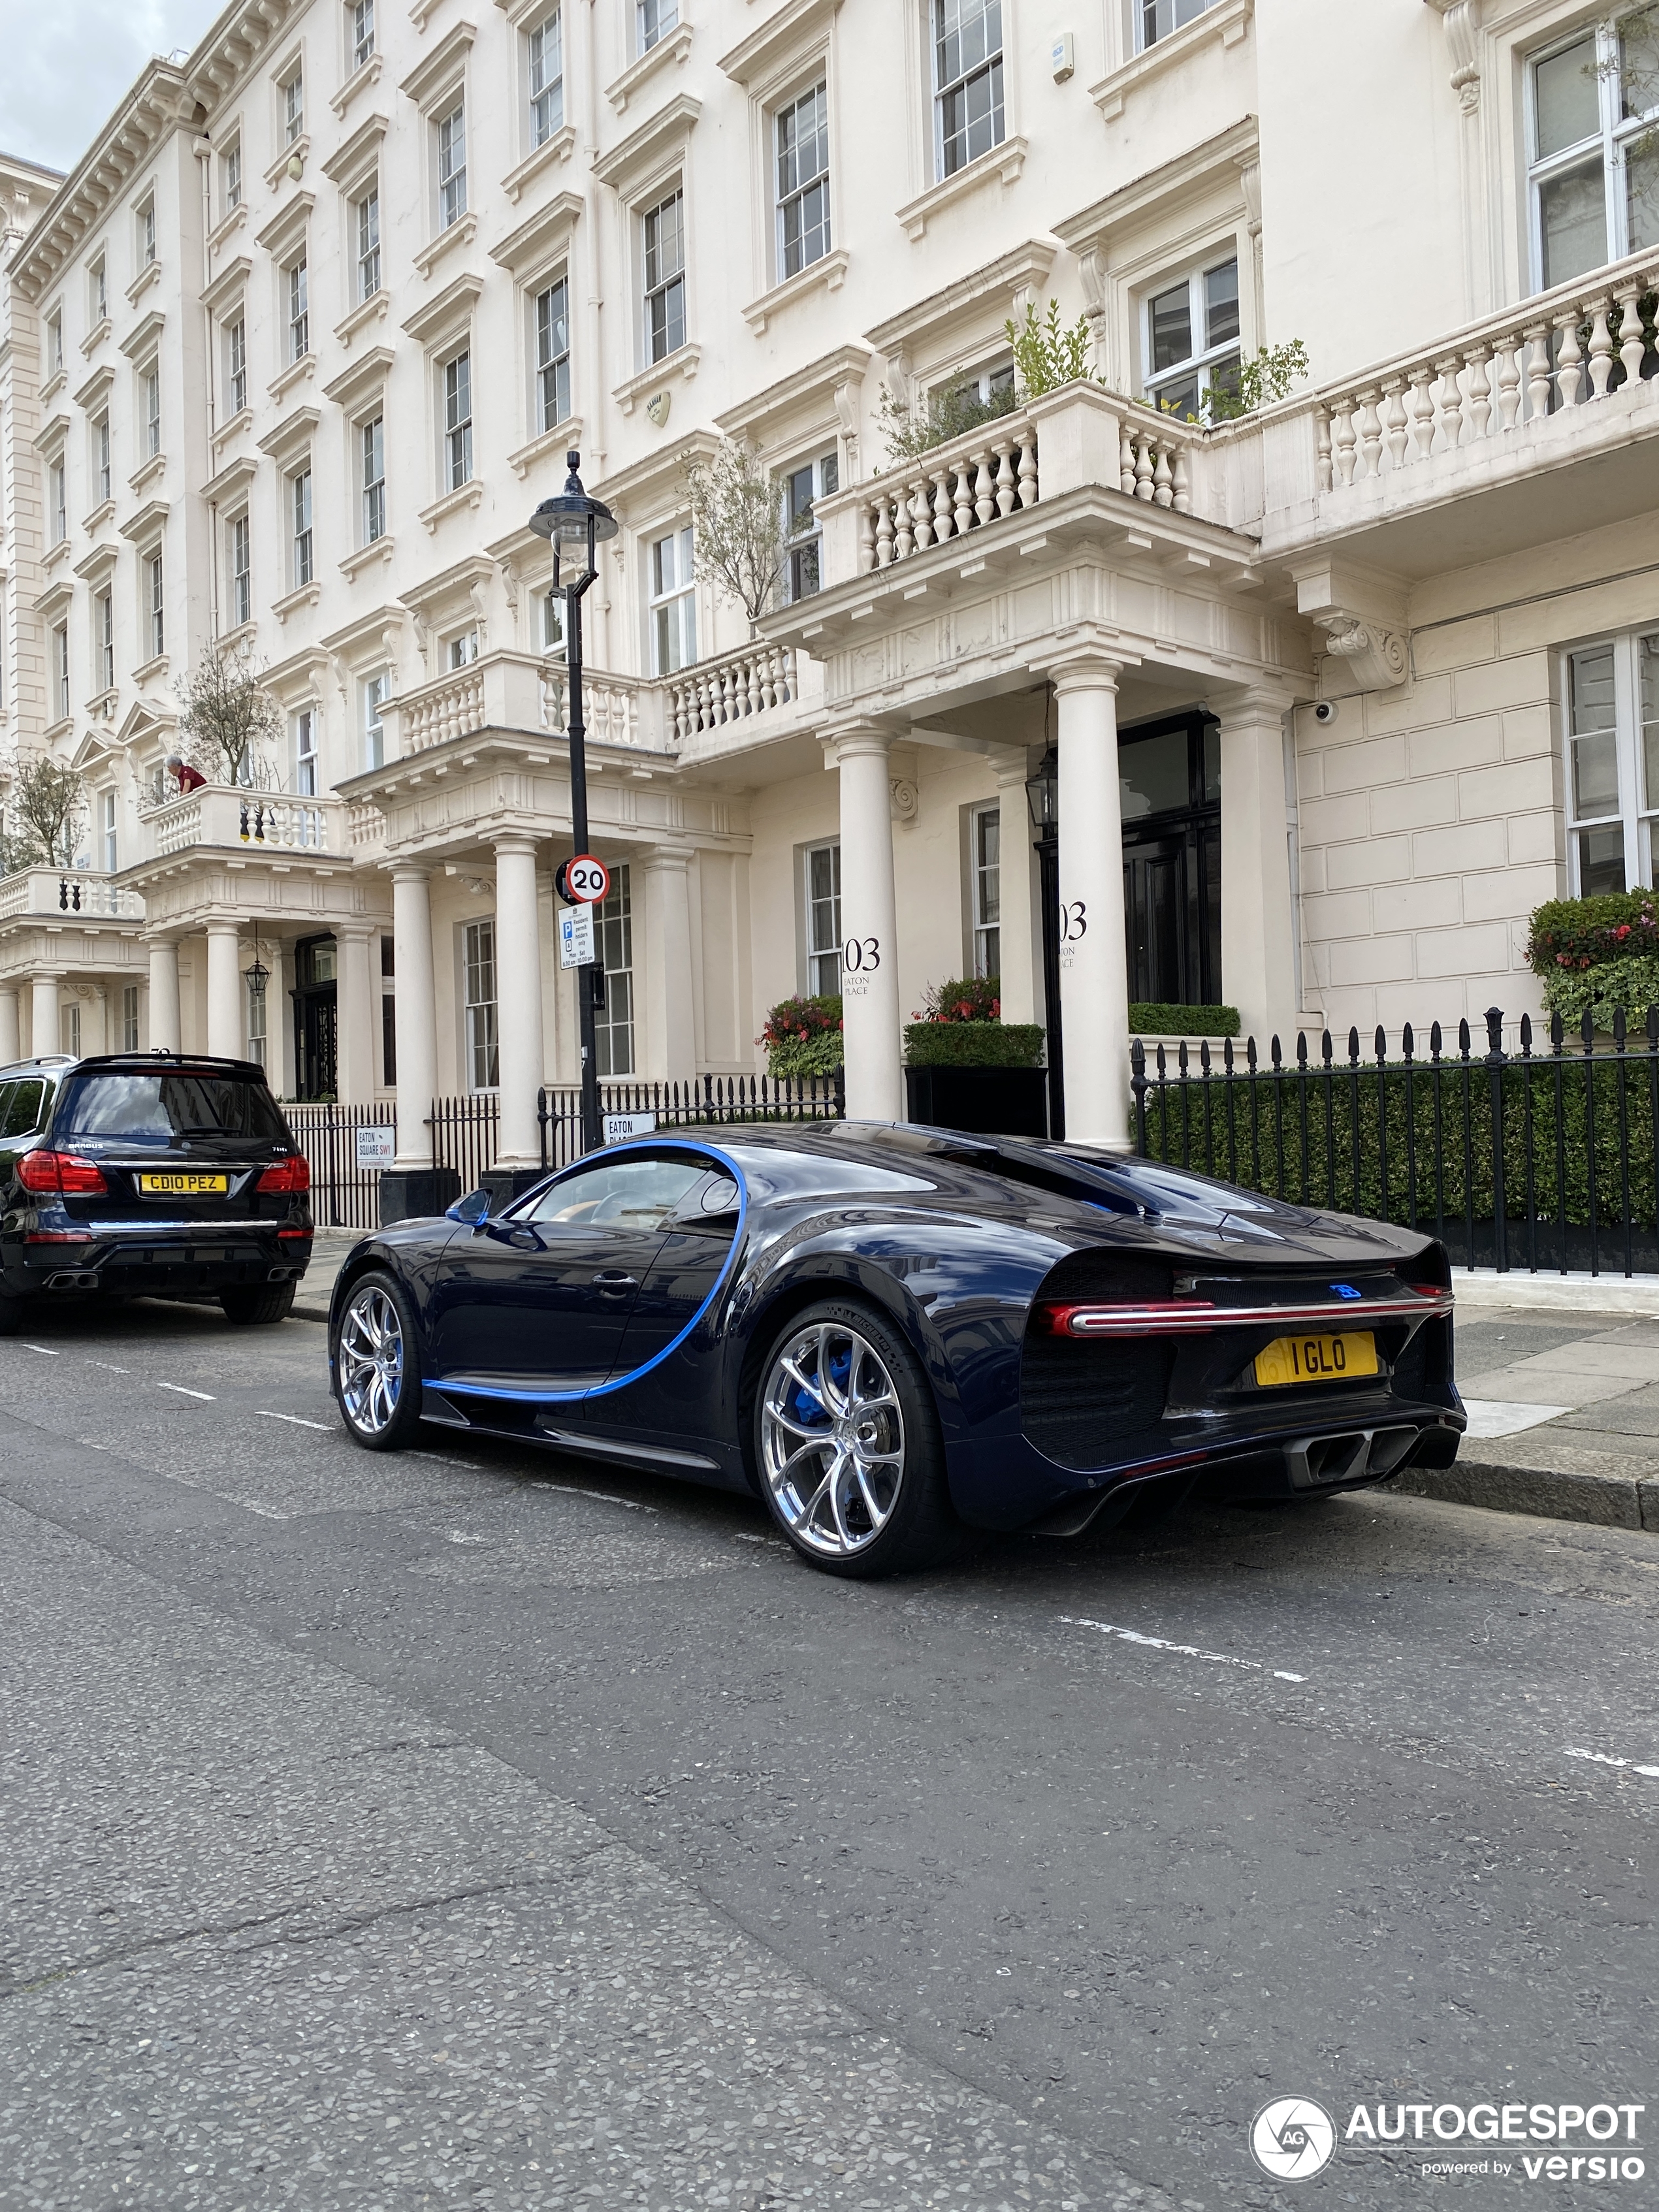 A new Chiron emerges in London